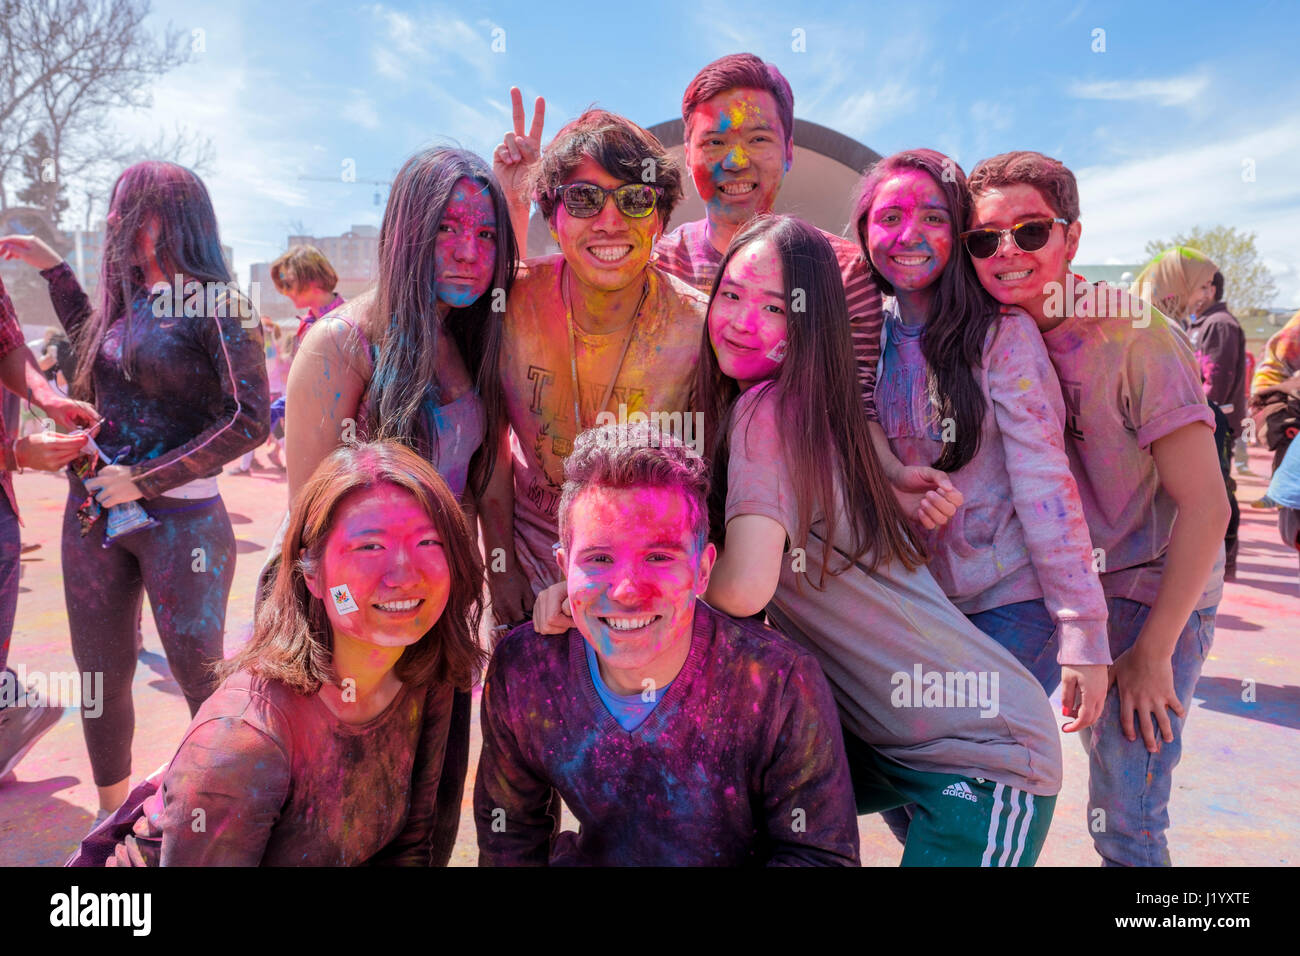 London, Ontario, Canada, 22nd Apr, 2017. A group of teenagers posing for a picture at Victoria Park during the Holi Spring Festival, also known as Rangwali Holi, Dhuleti, Dhulandi, Phagwah, or simply as Festival of Colours, an Hindu festival to celebrate the arrival of Spring in London, Ontario, Canada. Credit: Rubens Alarcon/Alamy Live News. Stock Photo